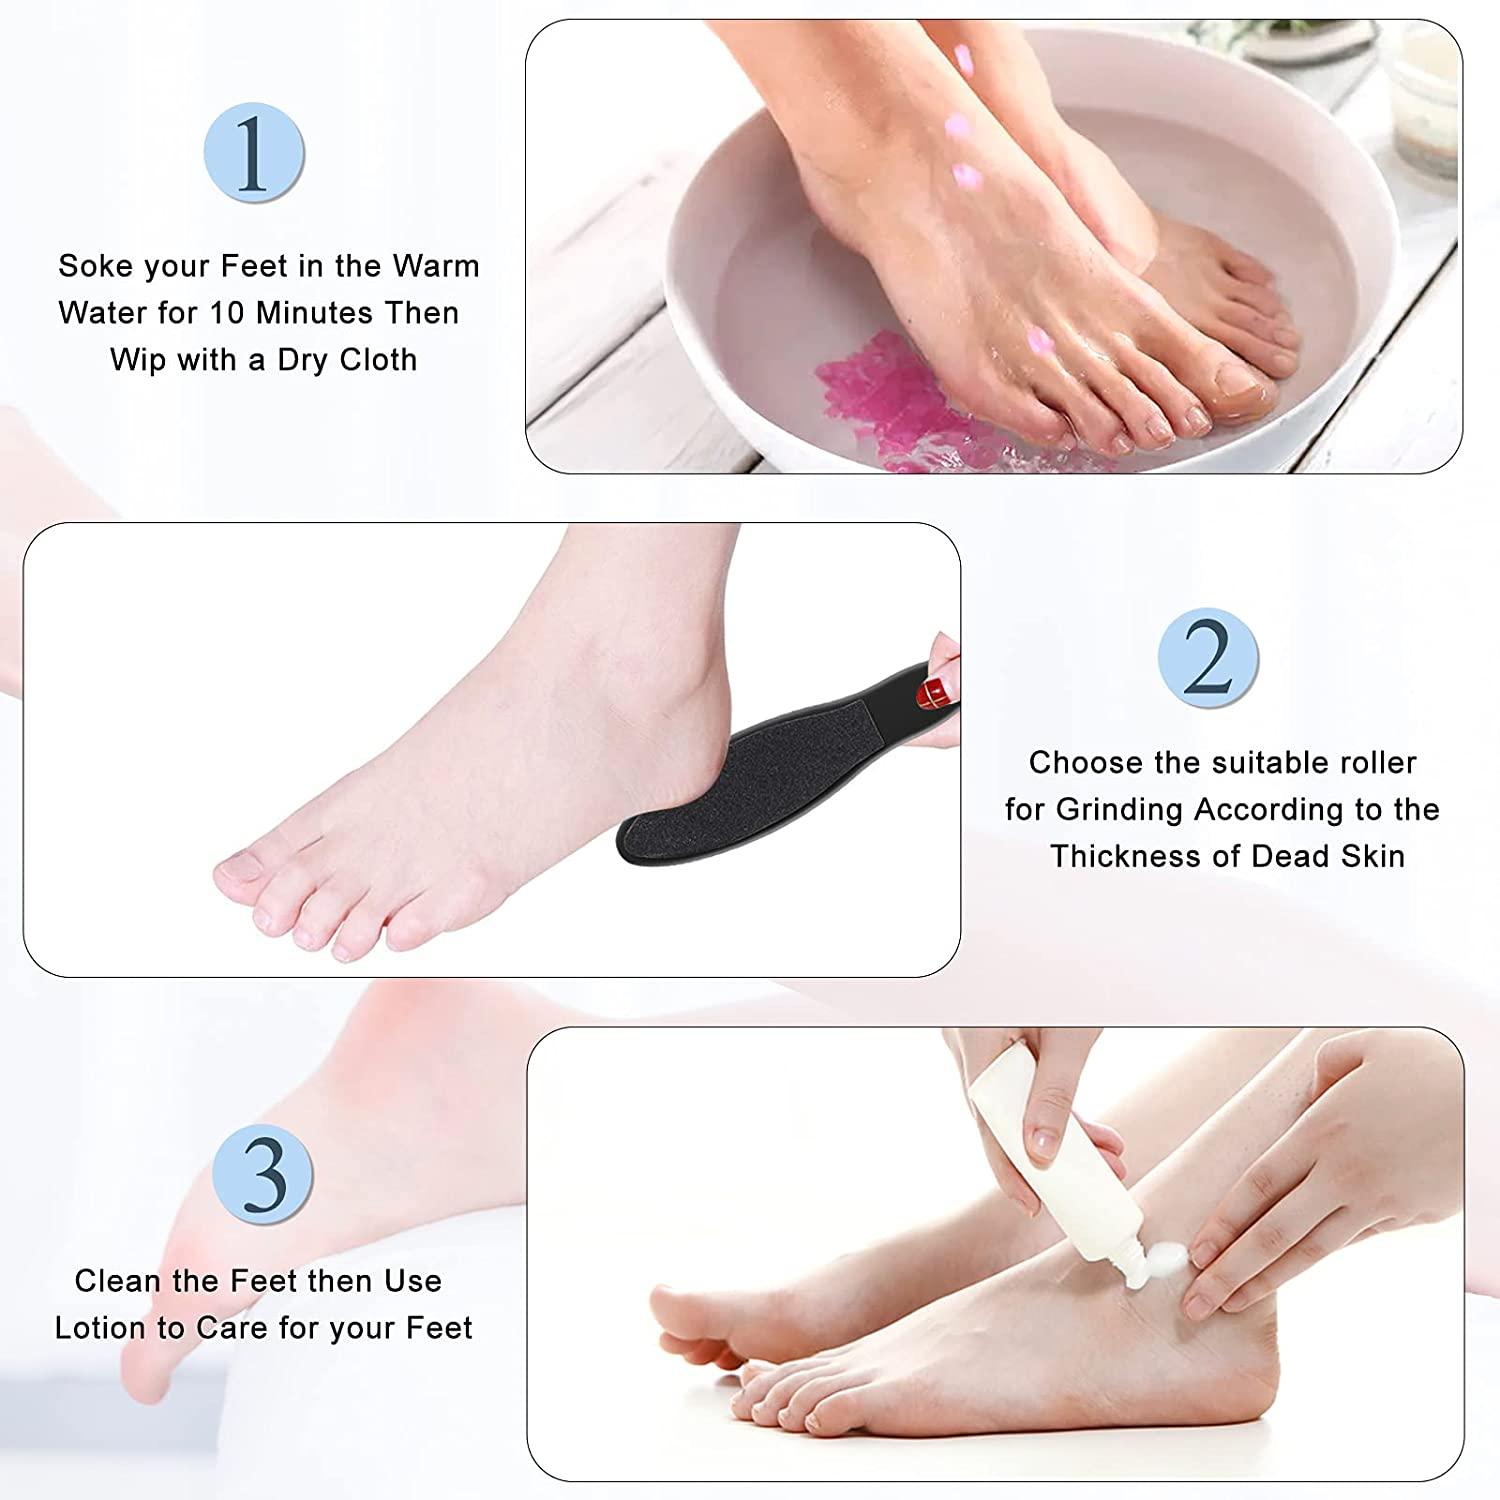 10 Best Callus Removers for Softer Feet, According to Experts